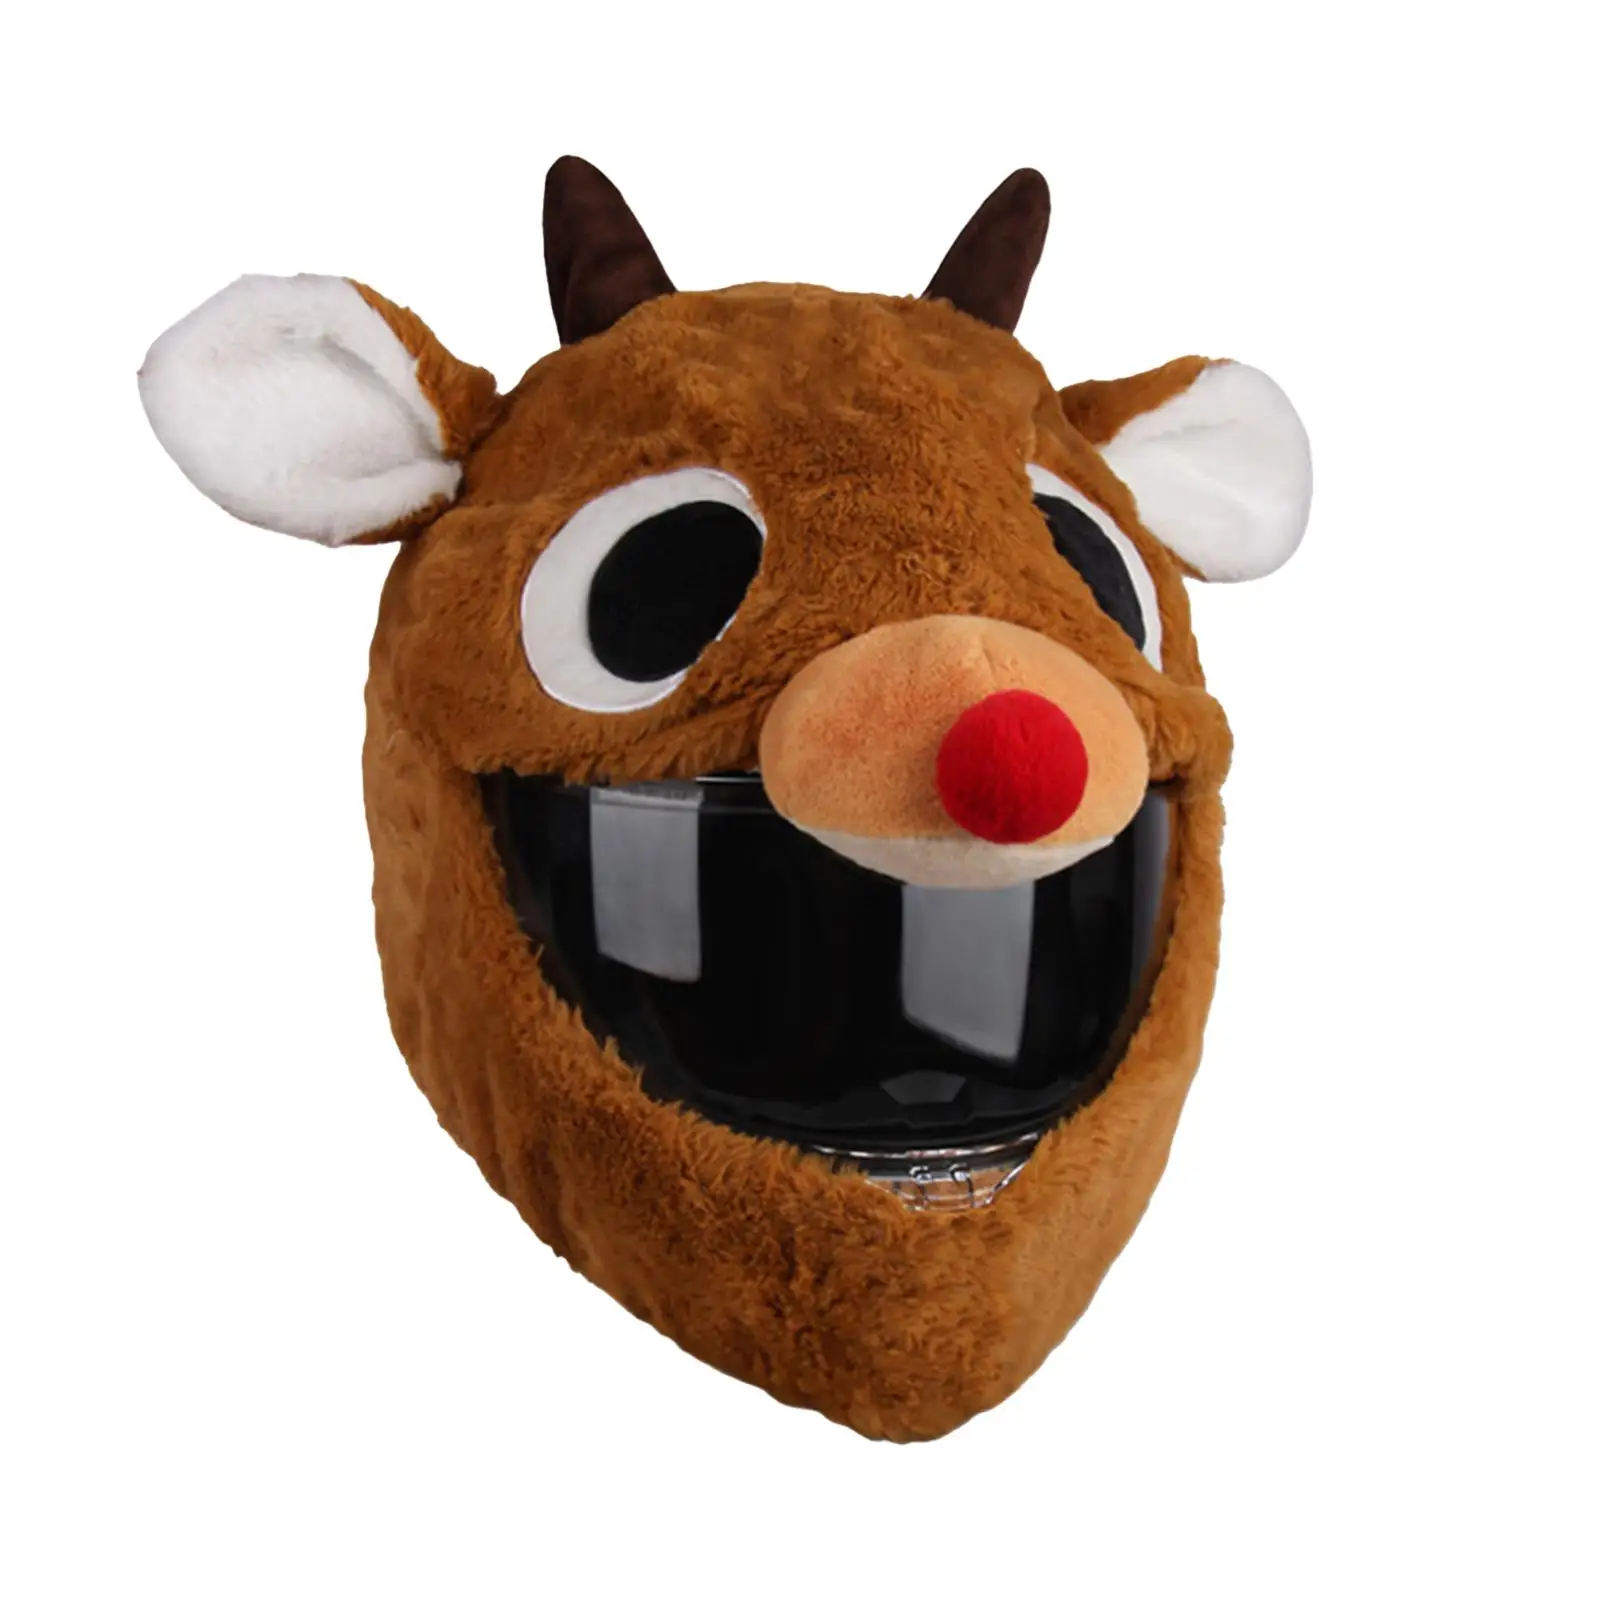 Helmet Cover Reindeer Shaped Increase Riding Fun Protective Plush Soft Motorbike for Full Face Helmets Helmet Protective Cover